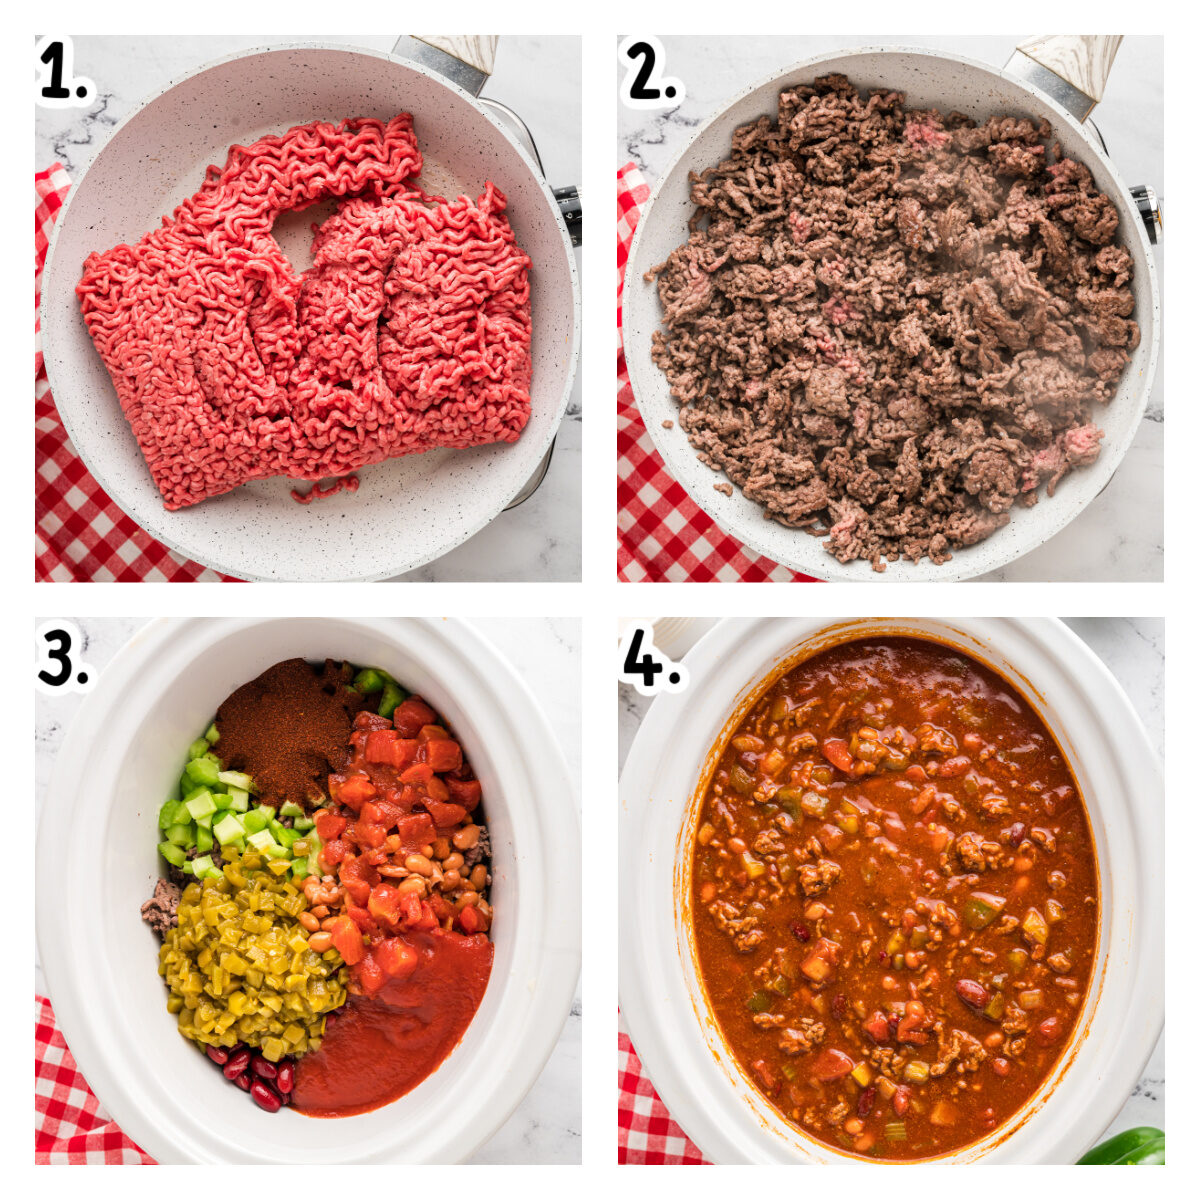 Four images showing how to make wendy's copycat chili in a slow cooker.